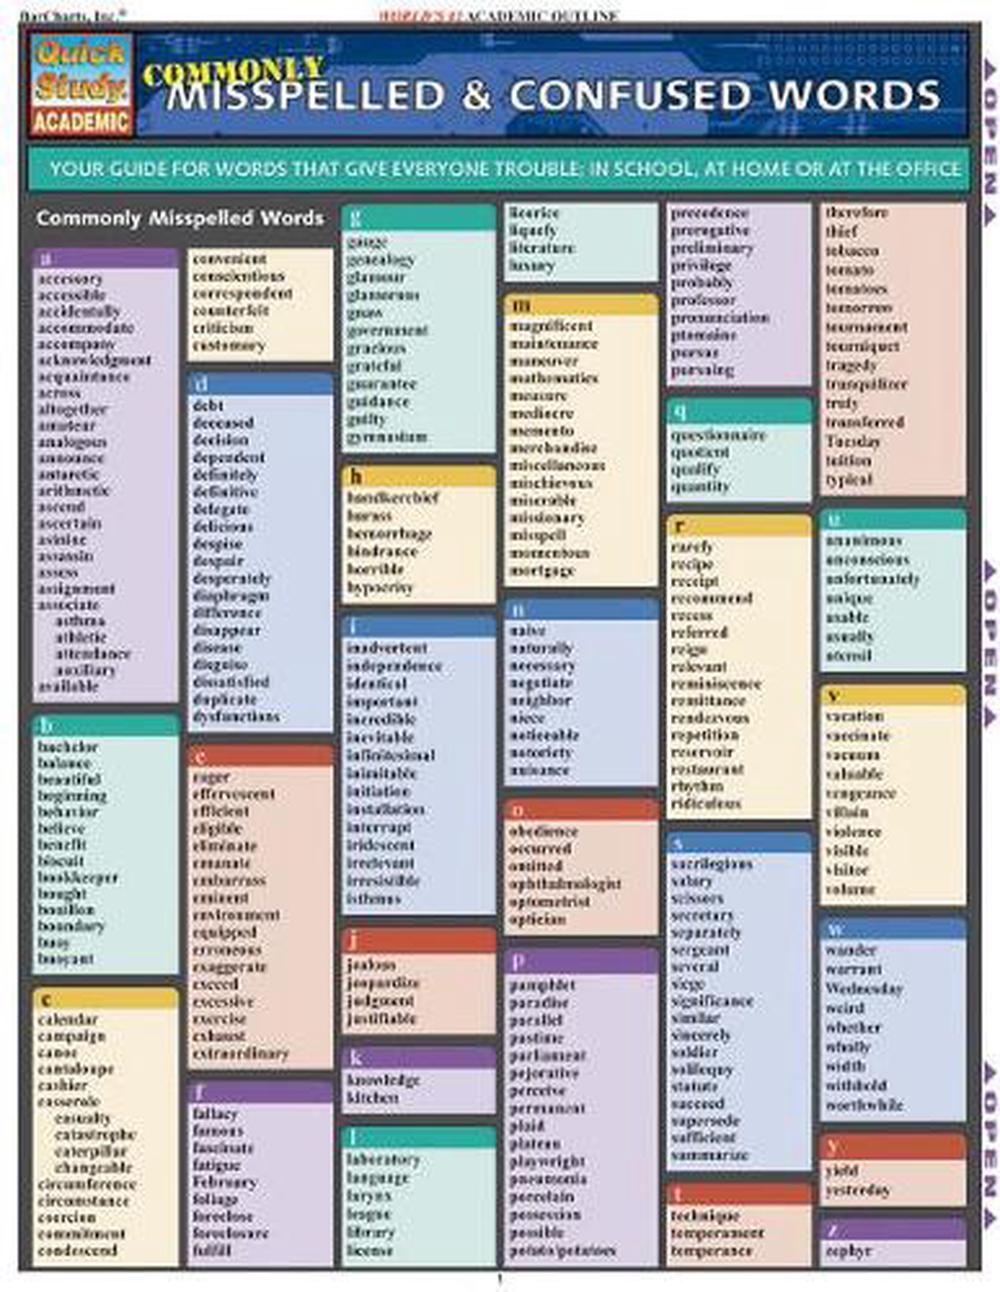 commonly-misspelled-confused-words-laminate-reference-chart-your-guide-for-words-that-give